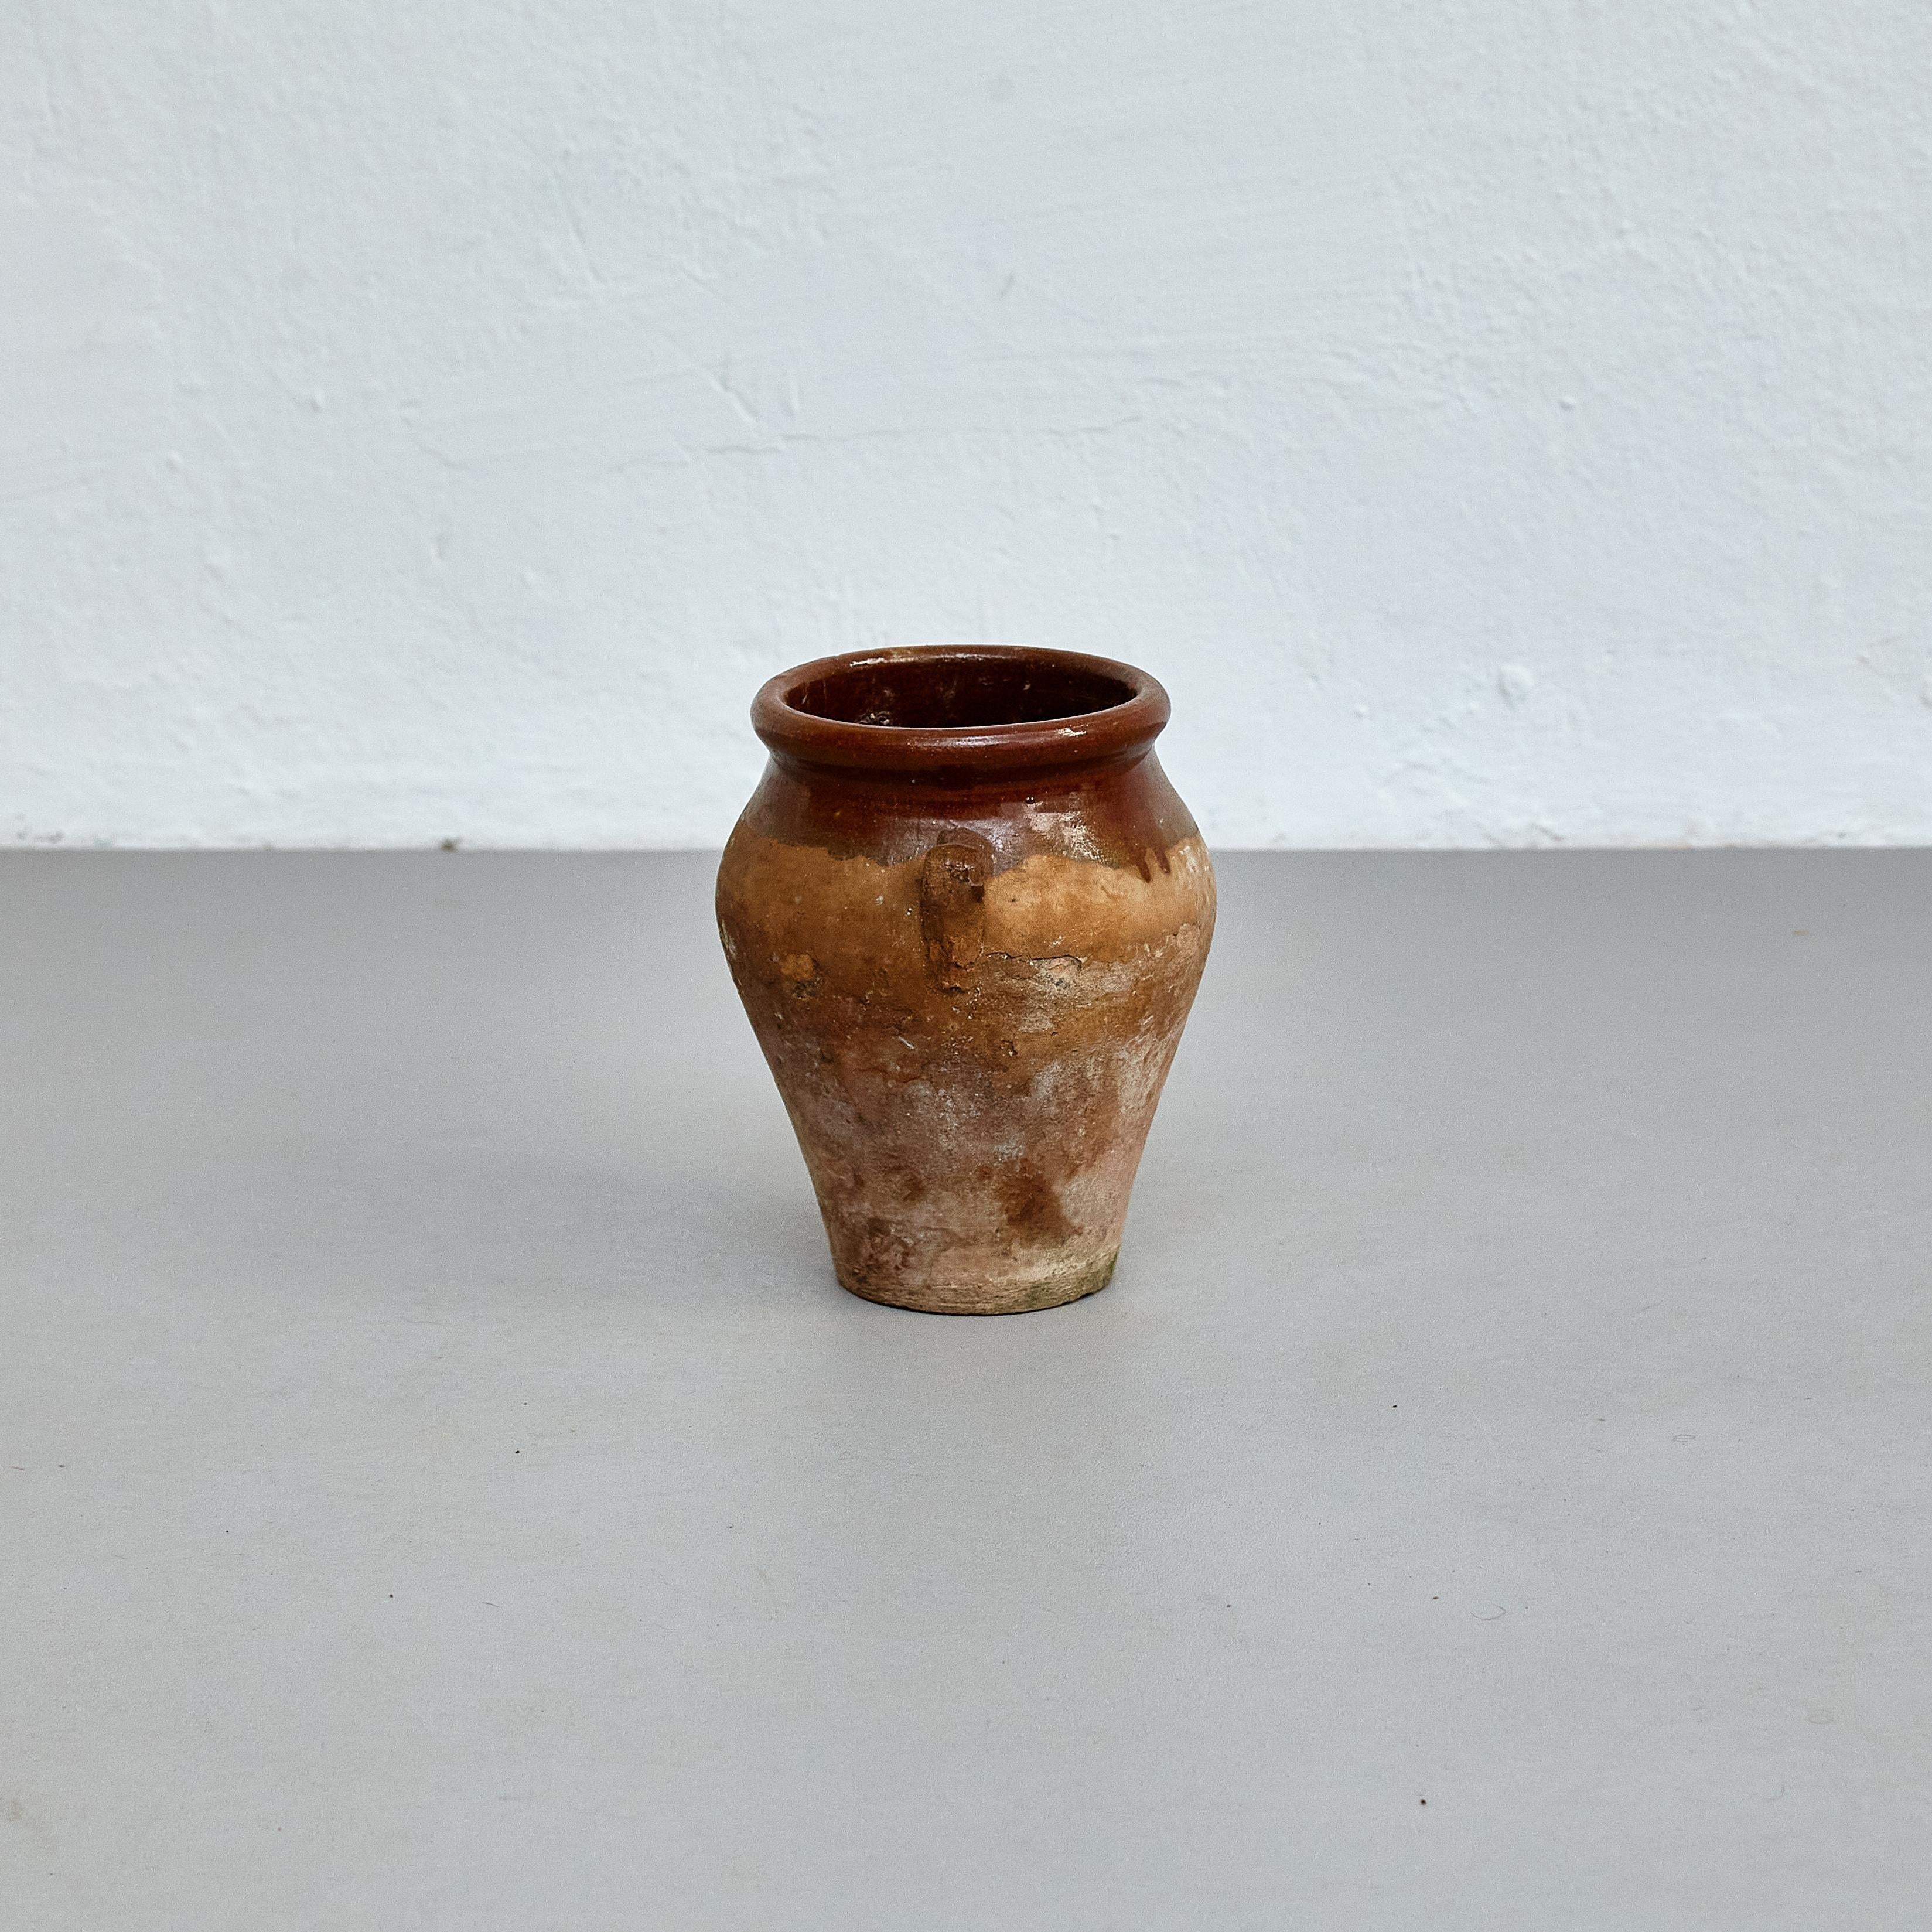 Early 20th century traditional Spanish ceramic vase.

Manufactured in Spain, early 20th century.

In original condition with minor wear consistent of age and use, preserving a beautiful patina.

Materials: 
Ceramic

Dimensions: 
Diam 19.5 cm x H